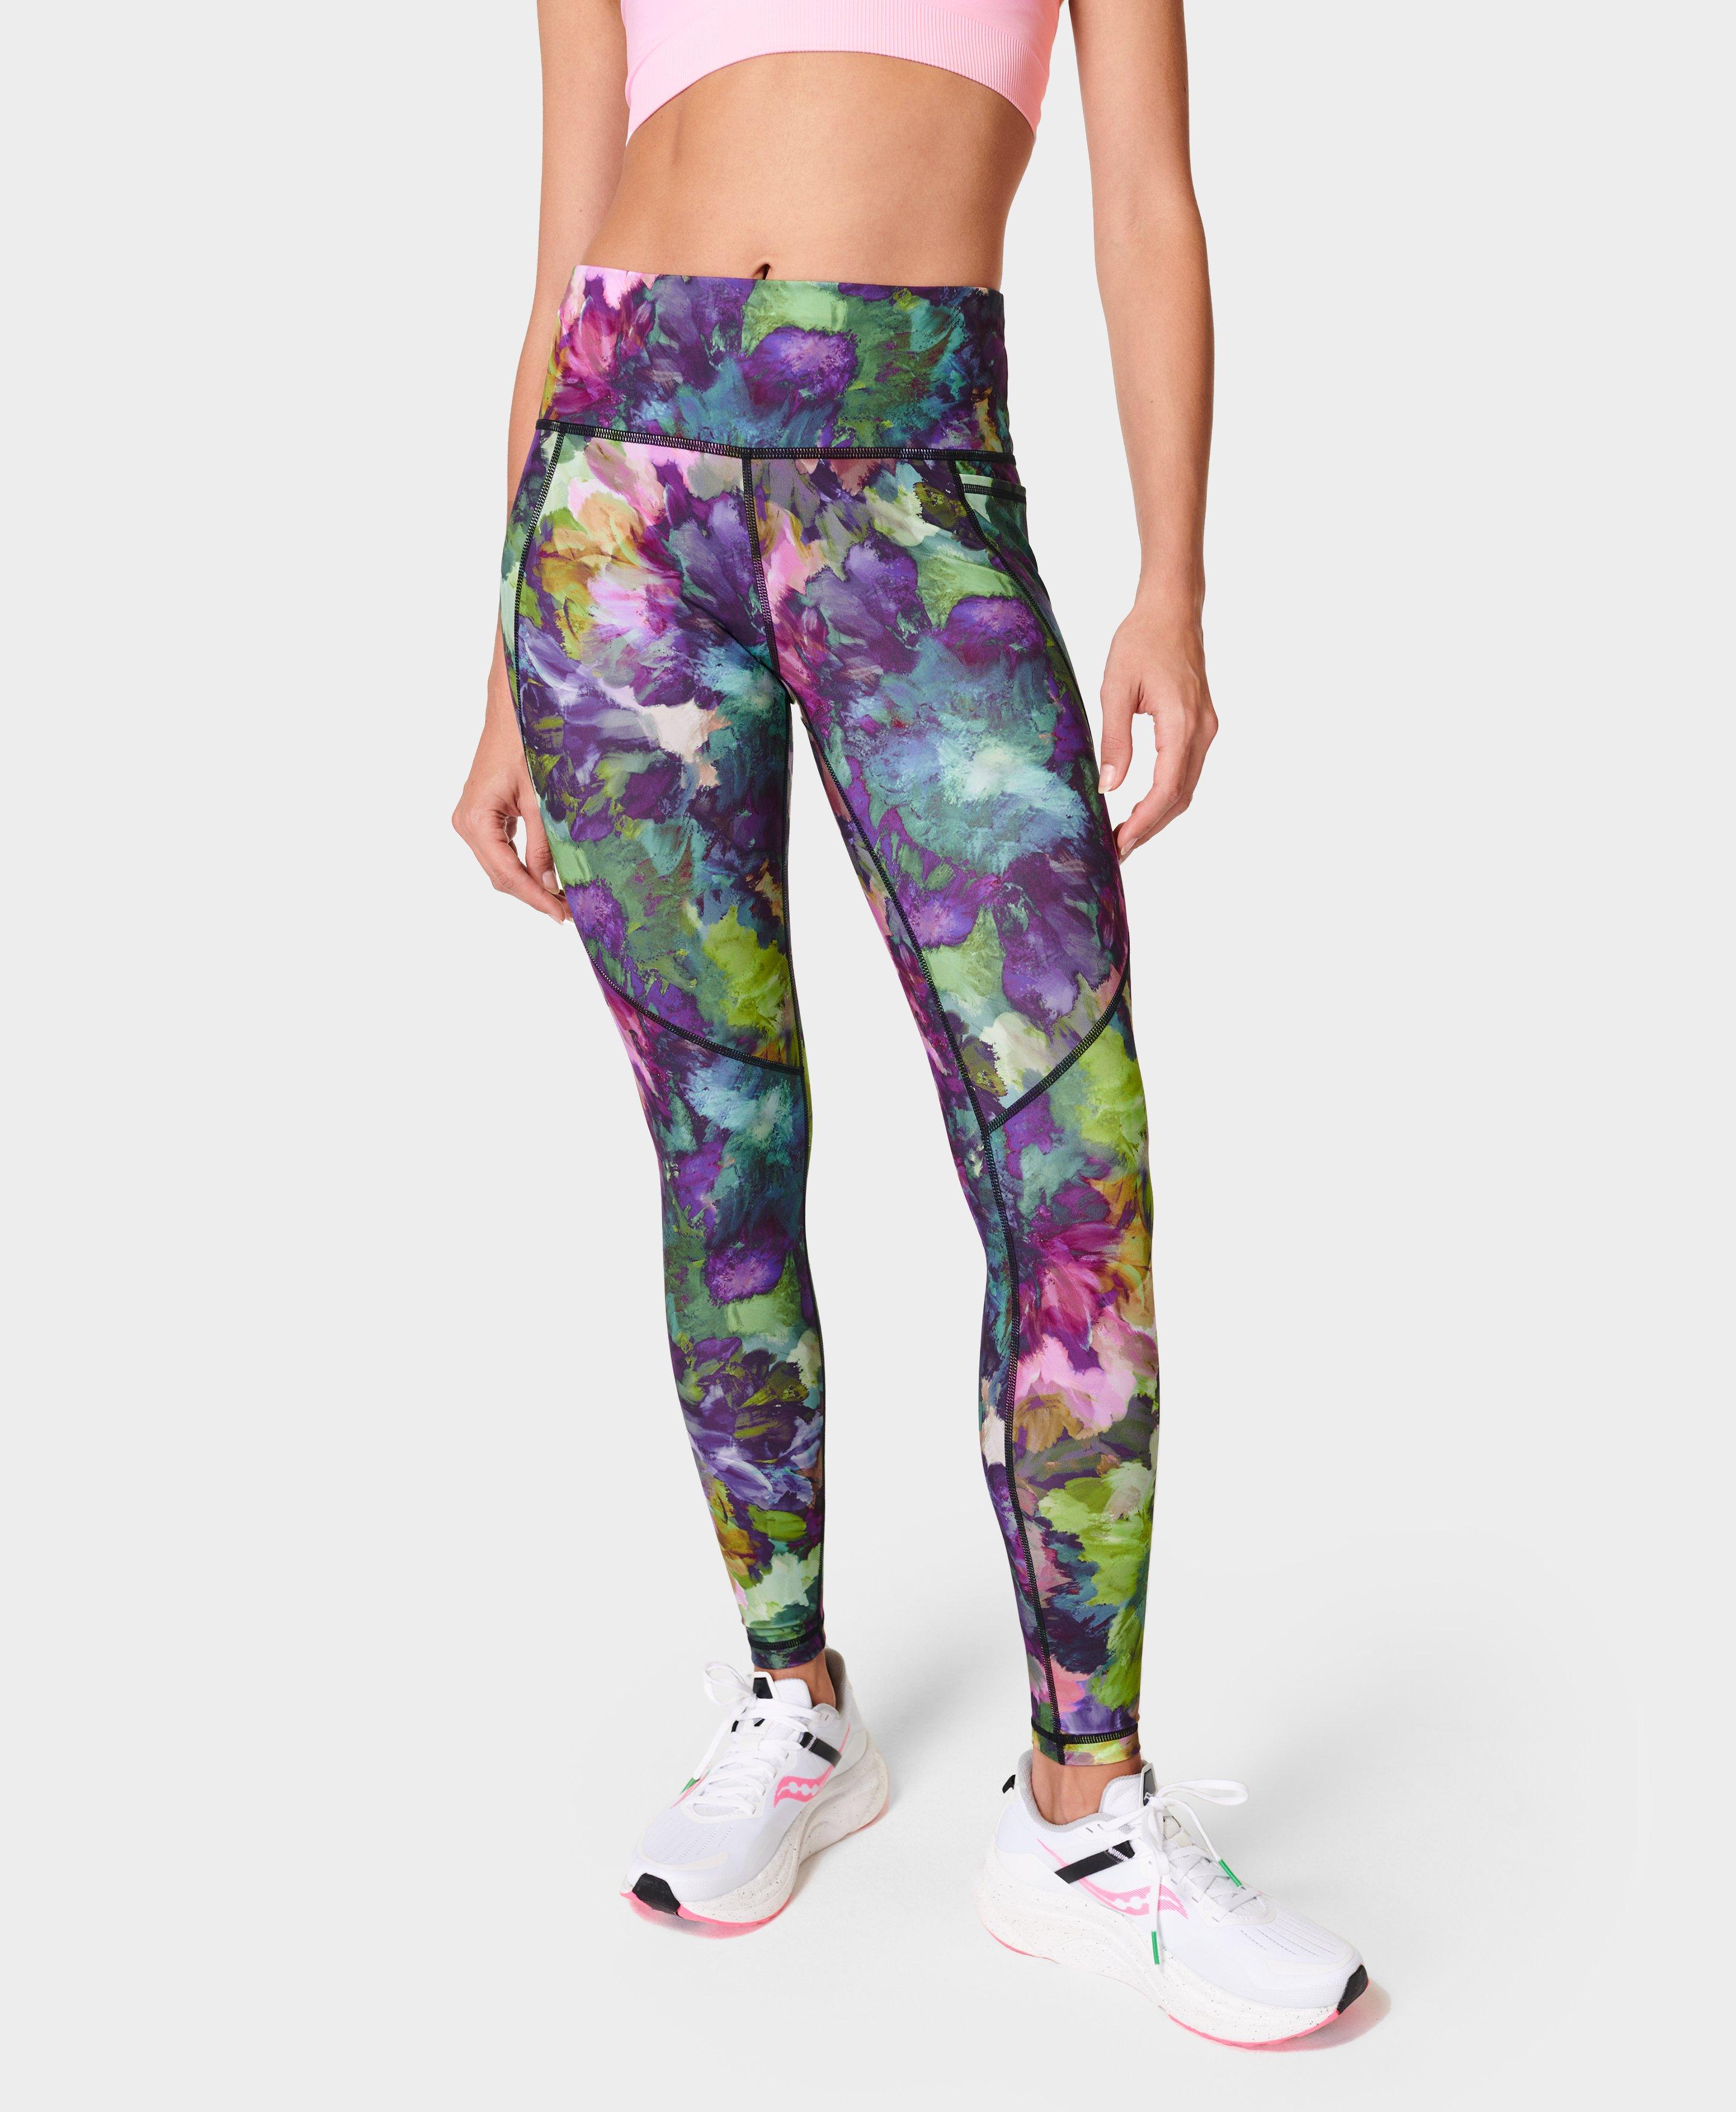 Power Workout Leggings - Green Luxe Floral Print